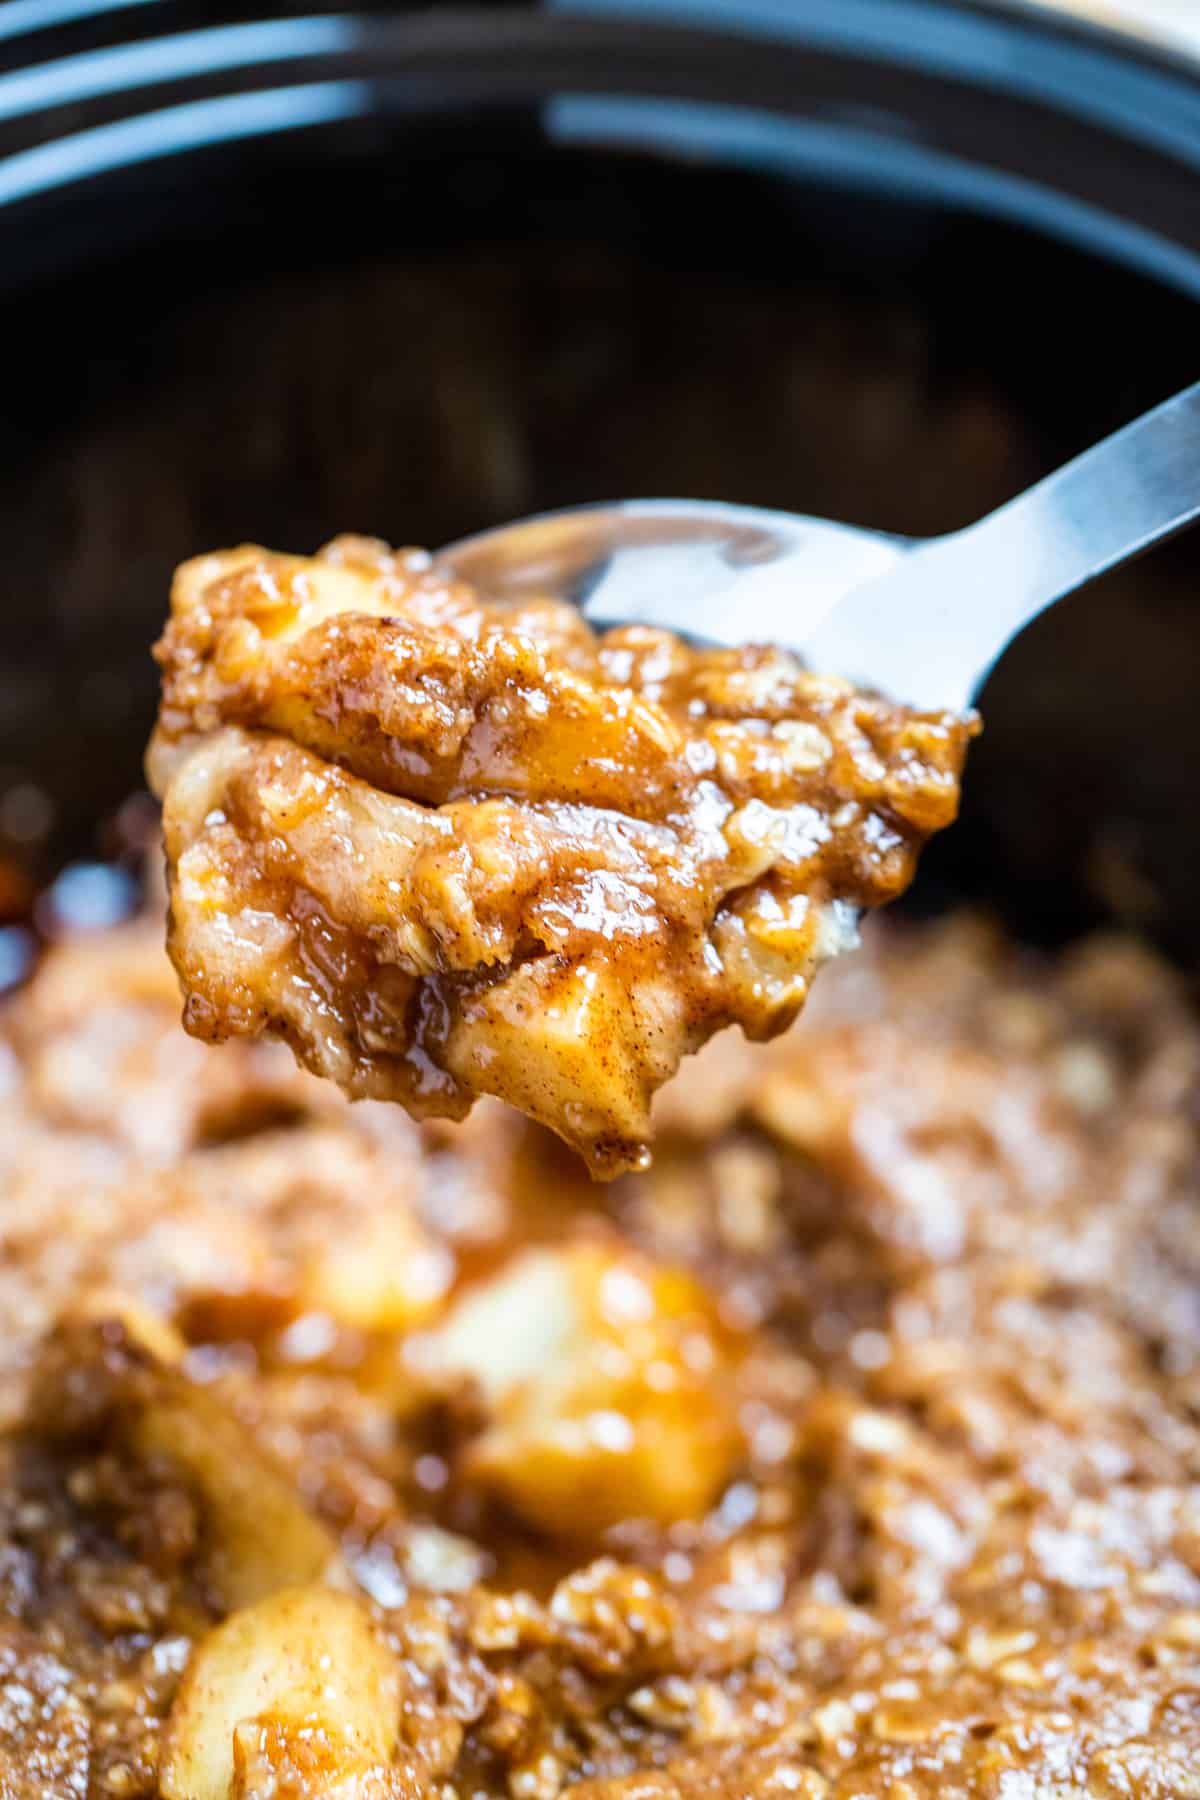 Apple crisp being scooped out of a slow cooker with a spoon.